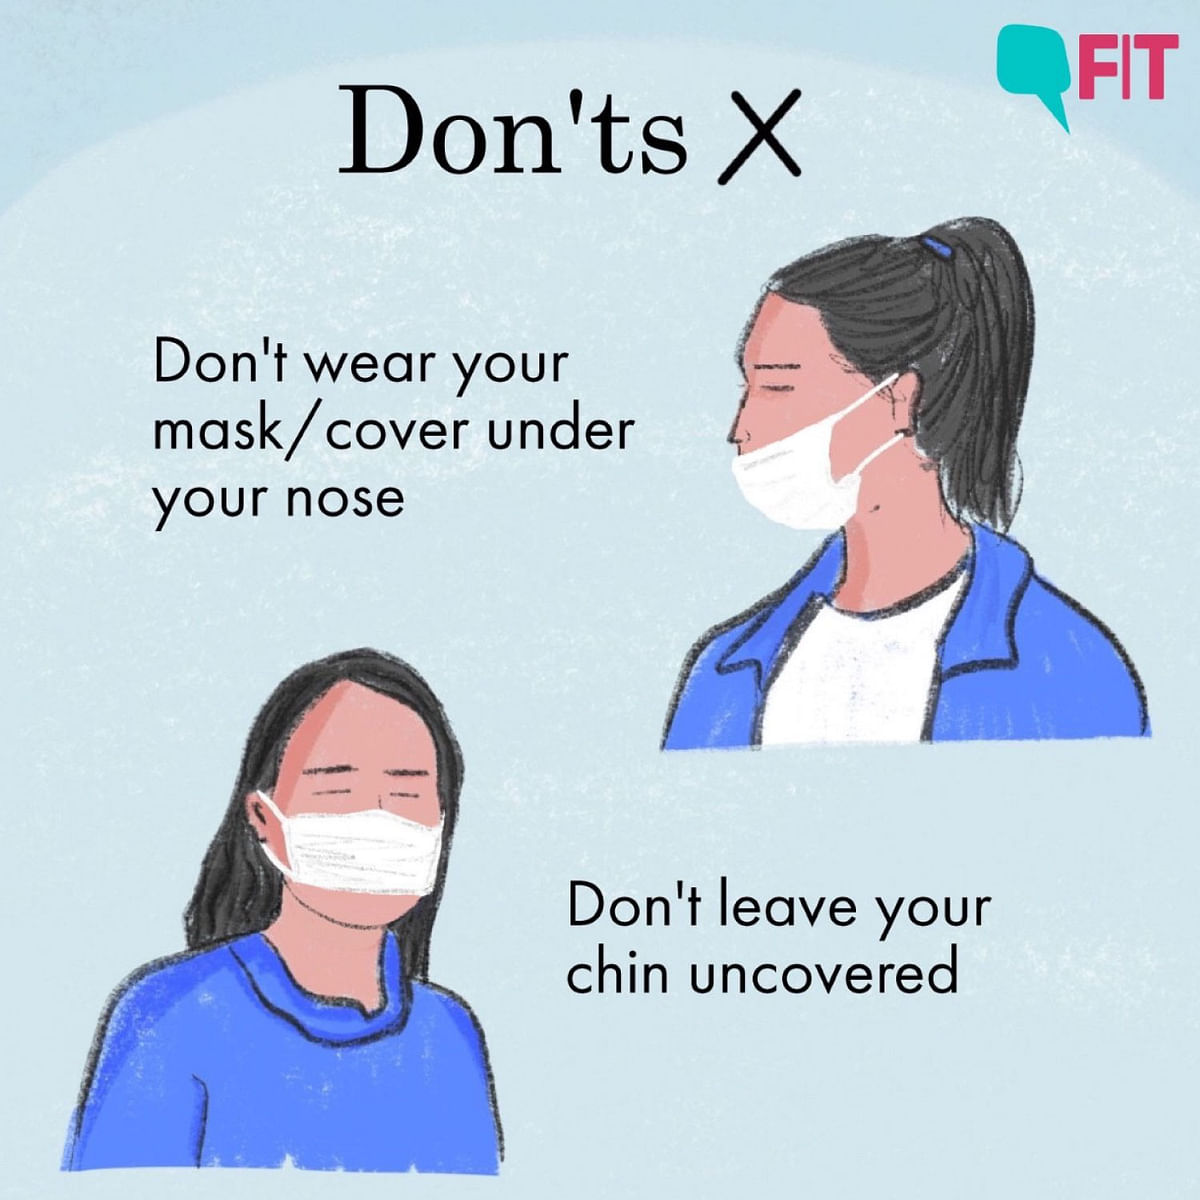 How not to wear a mask